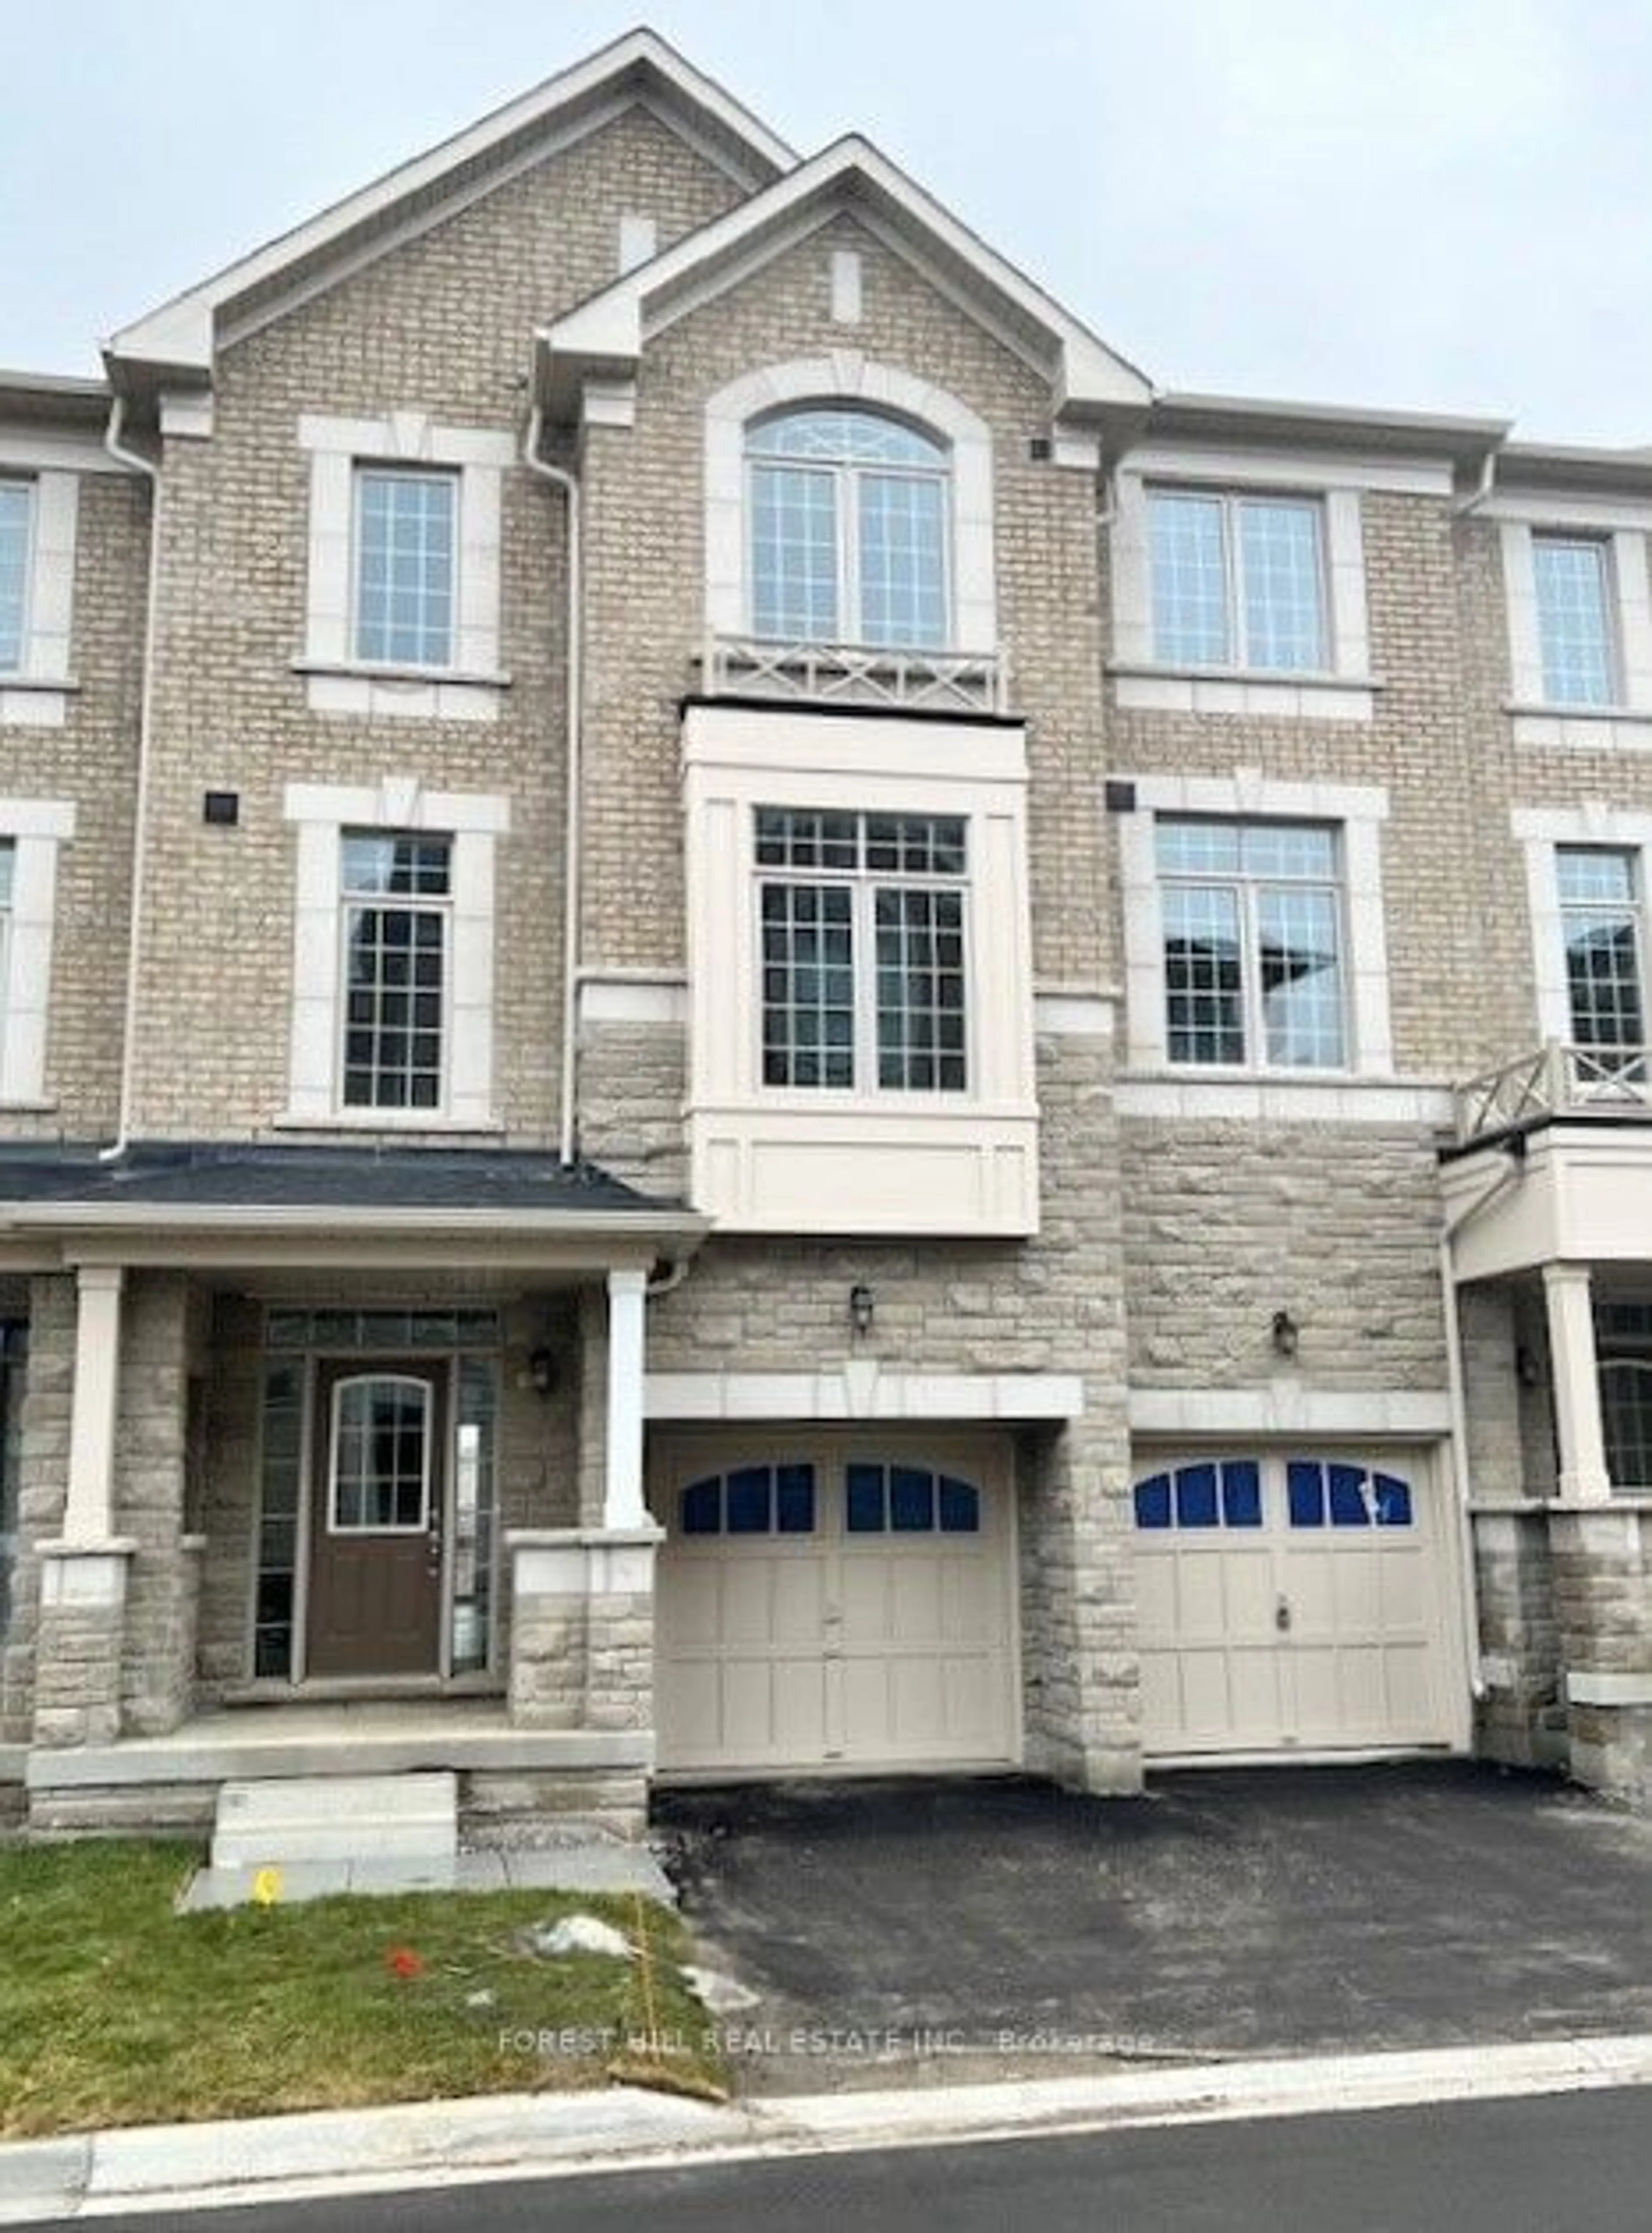 Home with brick exterior material for 10 Andress Way, Markham Ontario L3S 3J5